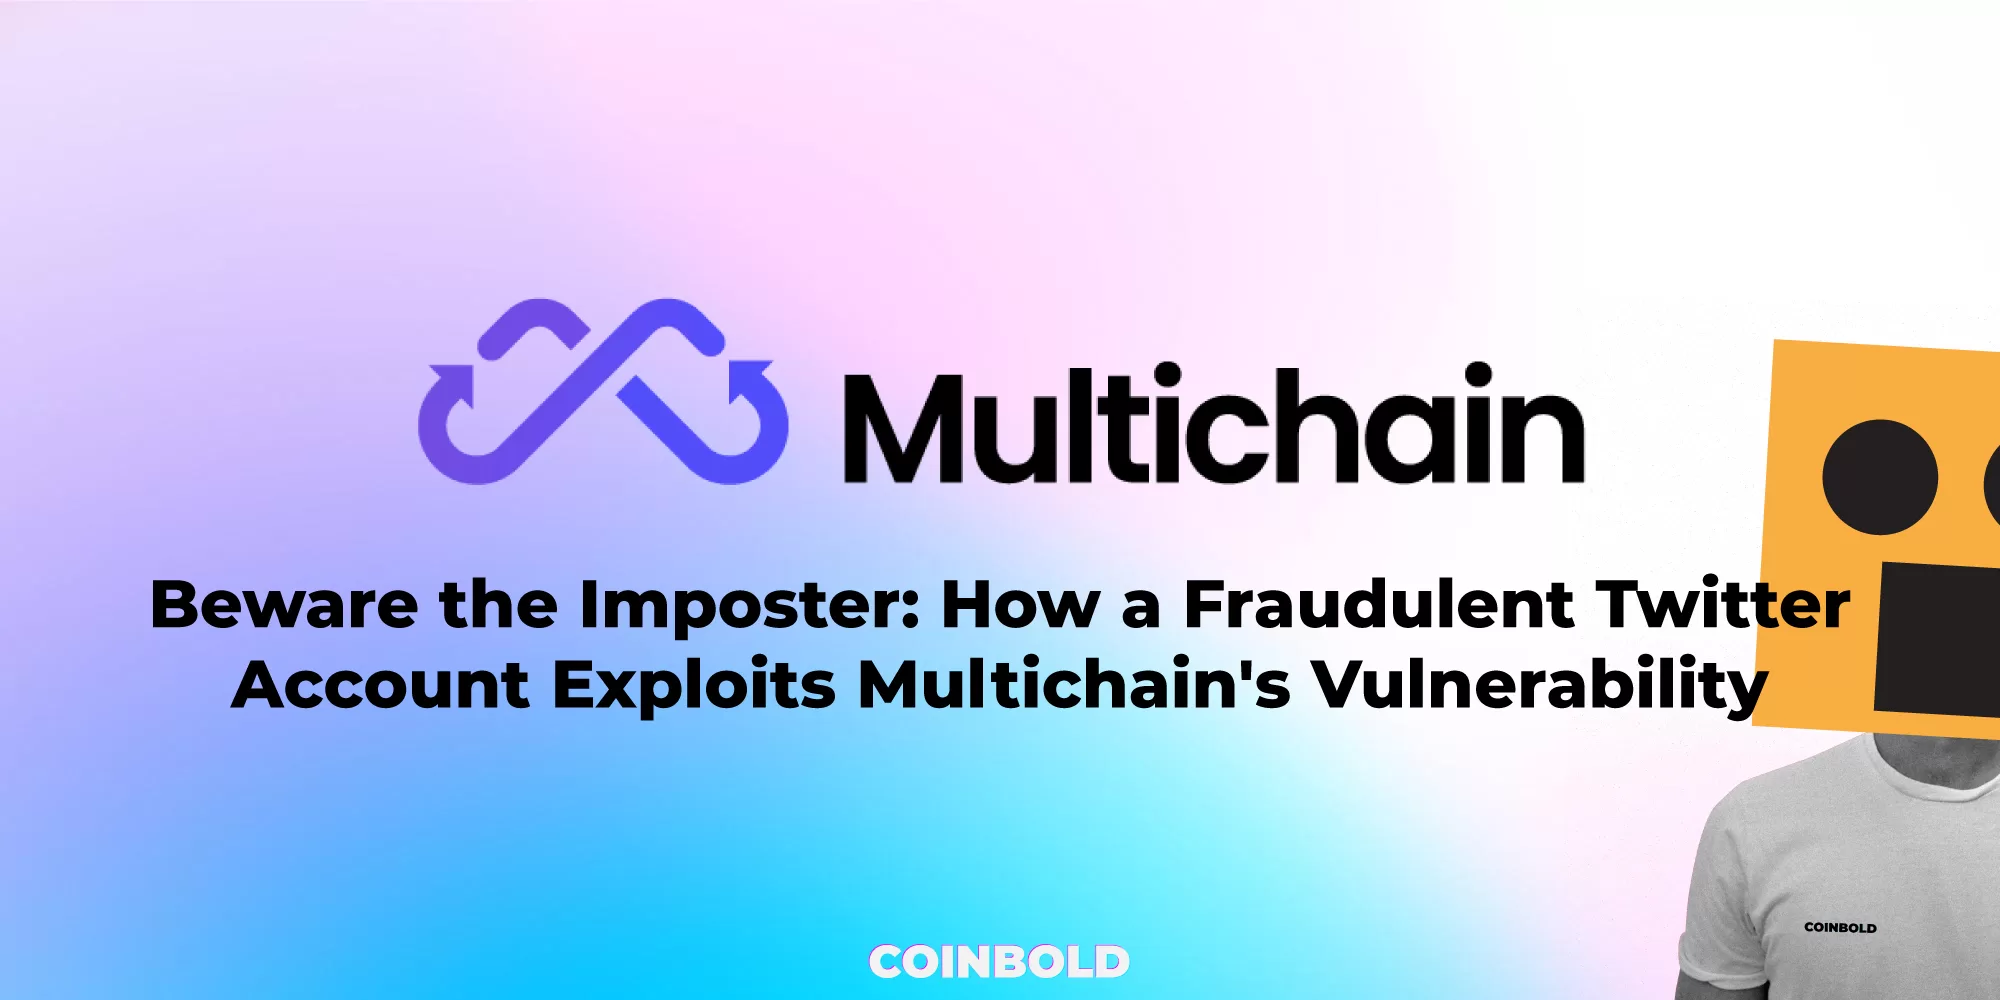 Beware the Imposter: How a Fraudulent Twitter Account Exploits Multichain's Vulnerability